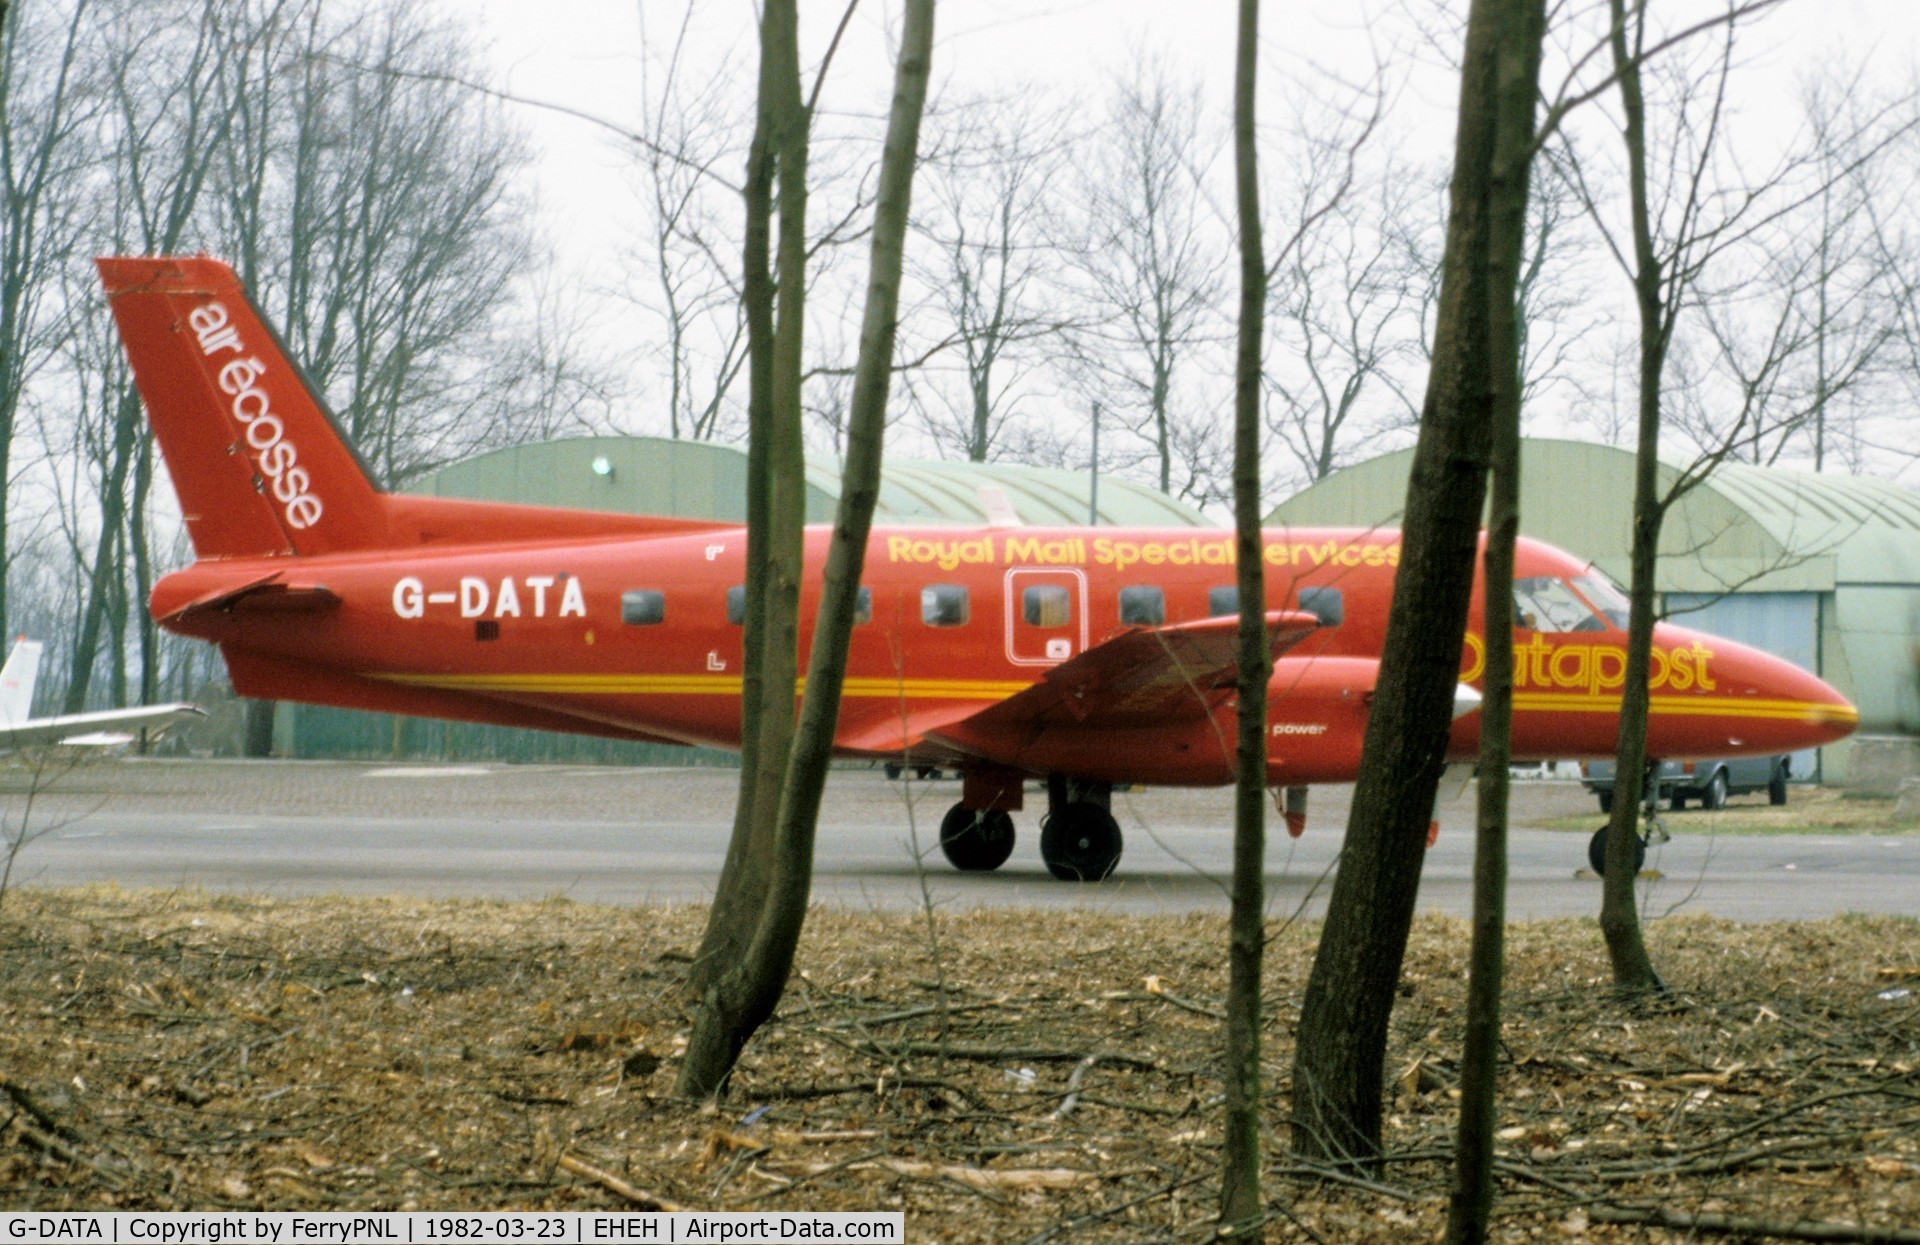 G-DATA, 1979 Embraer EMB-110P2 Bandeirante C/N 110201, Air Ecosse in the woods wearing Datapost colors